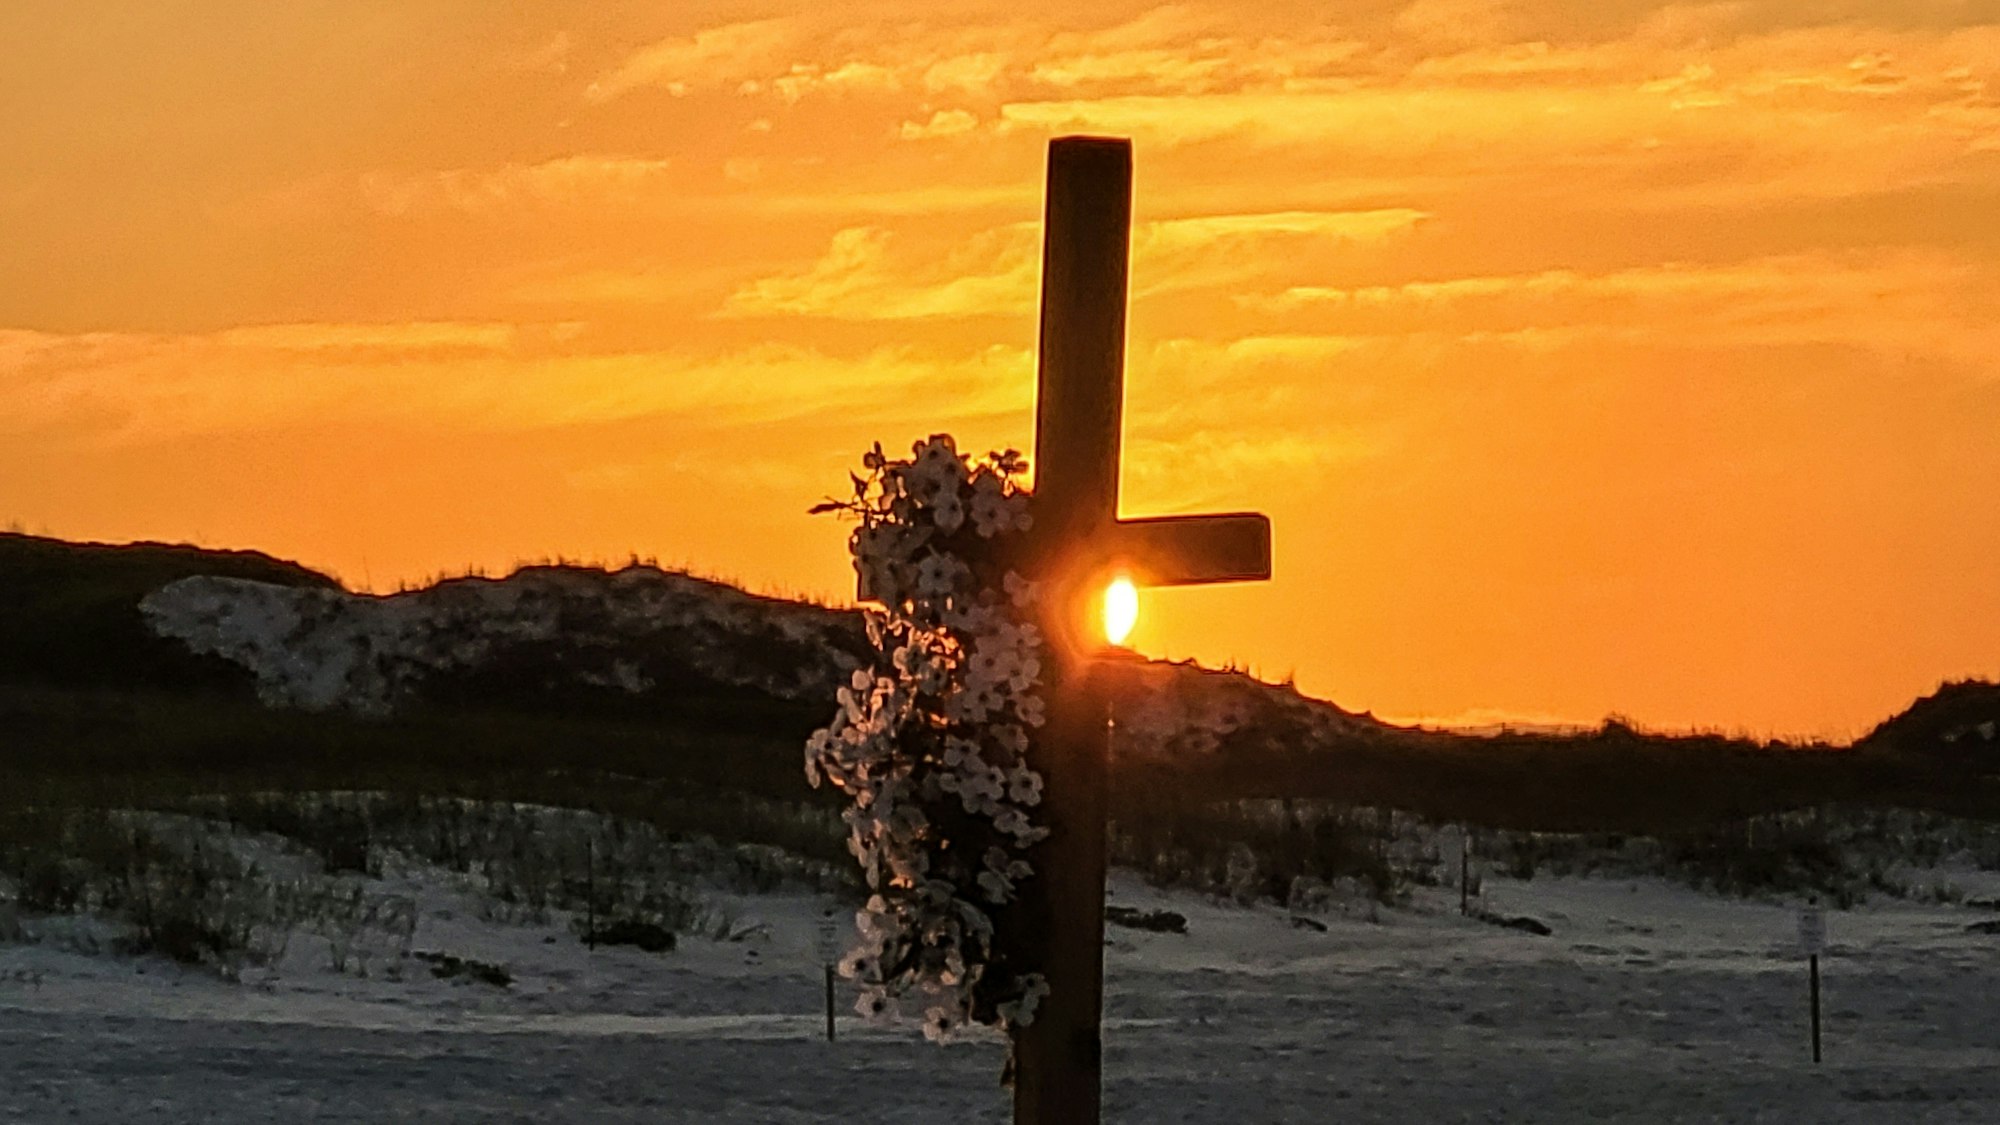 The wooden cross with flowers symbolizes Christ risen from the dead on Easter Sunday.